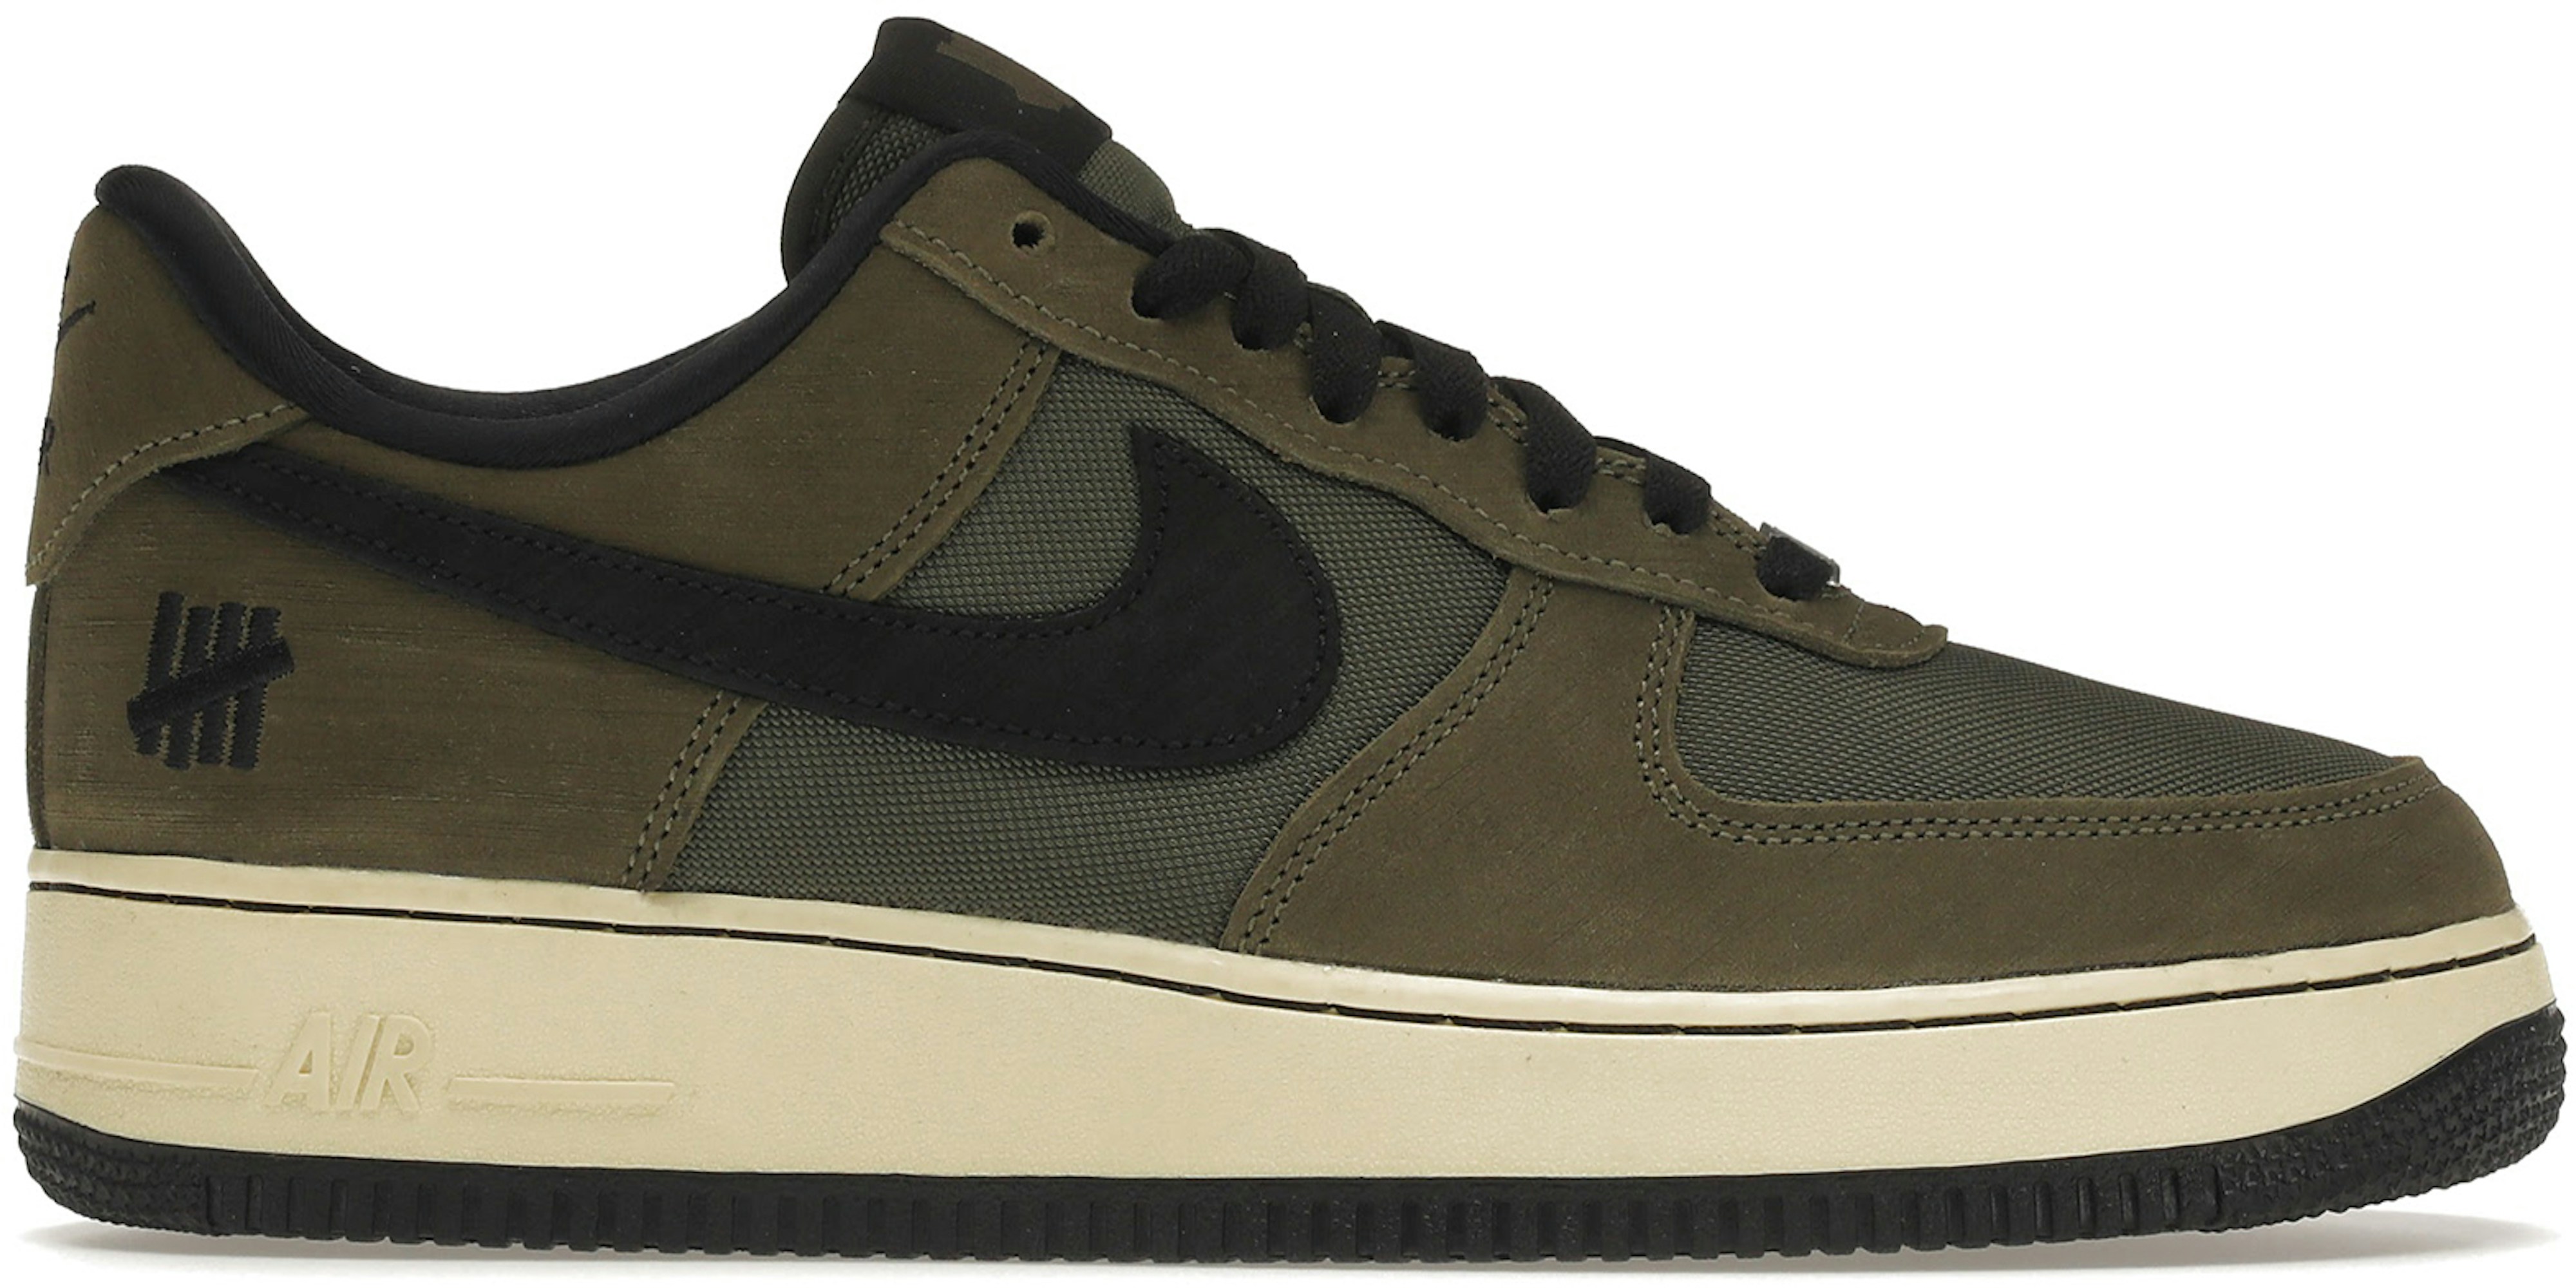 Nike Air Force 1 Low SP UNDEFEATED Ballistic Dunk vs. AF1 - DH3064-300